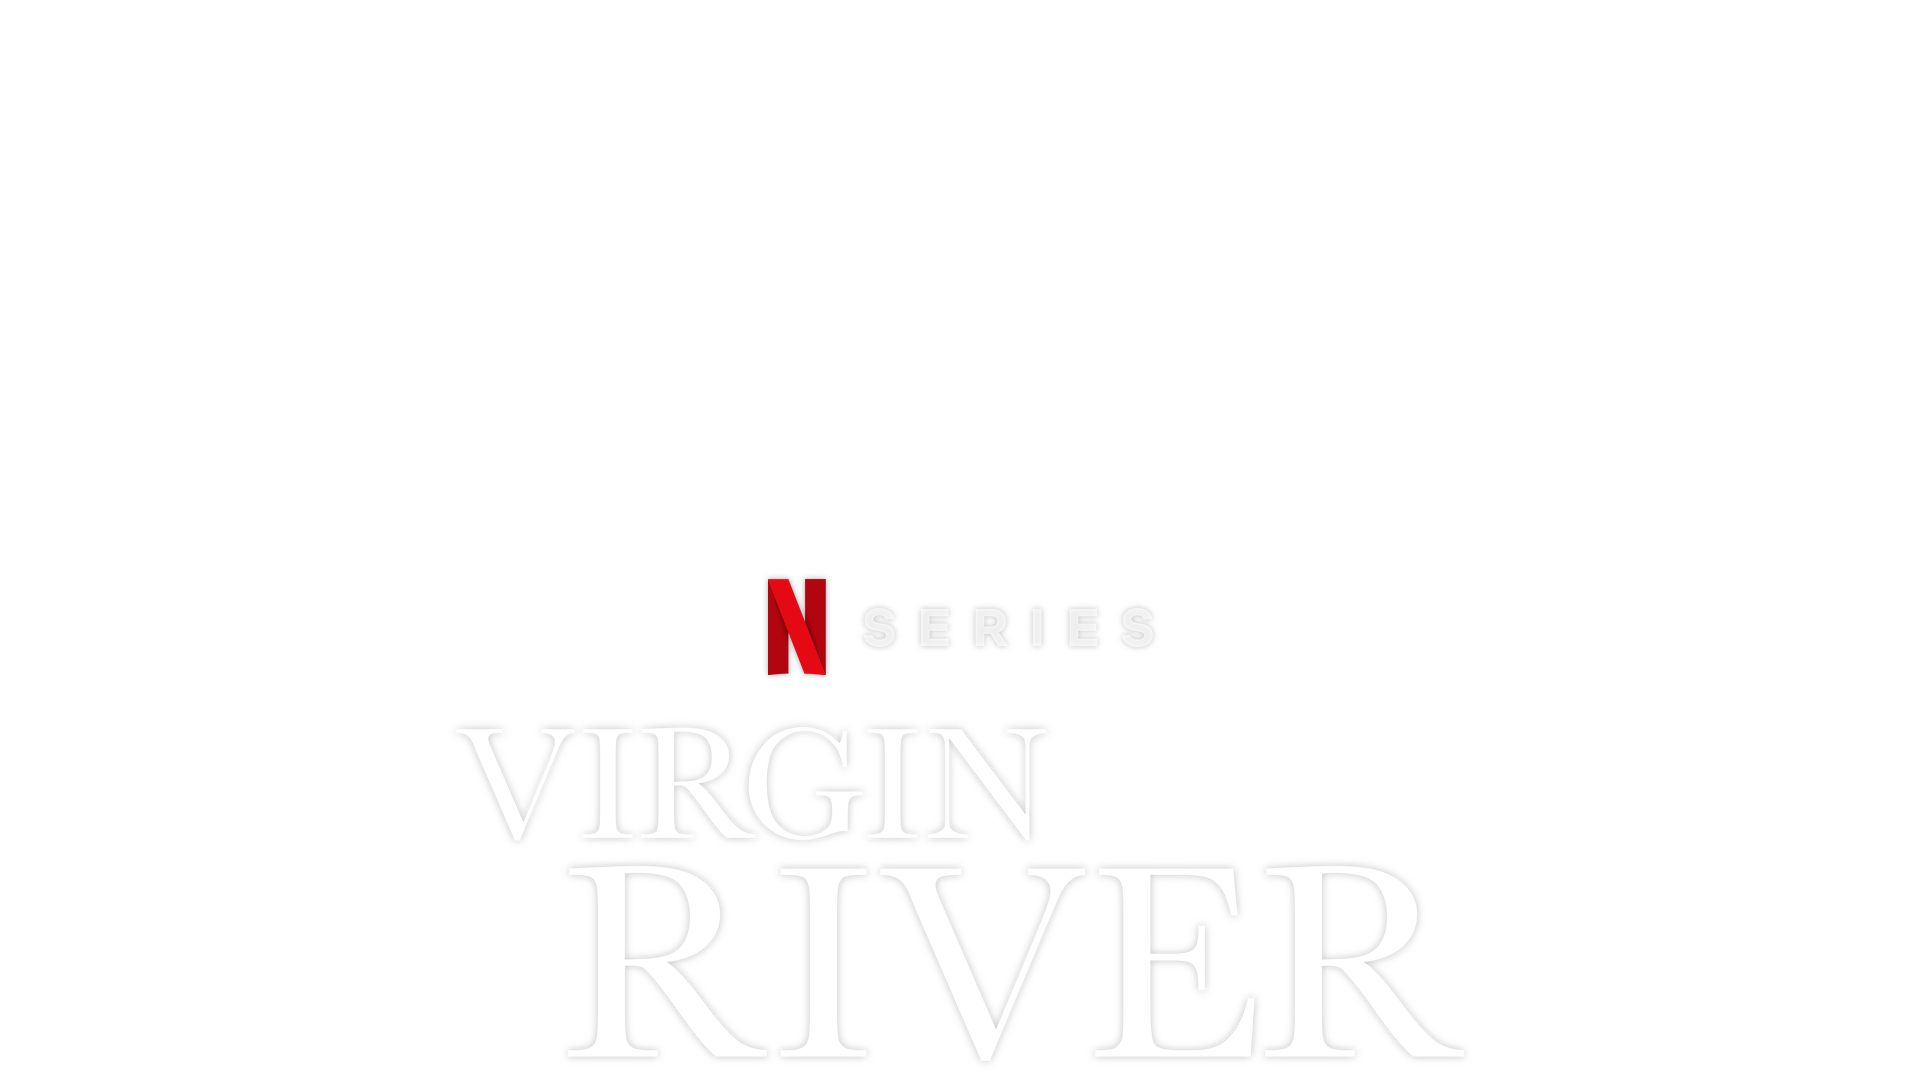 Virgin River Cast, News, Videos and more